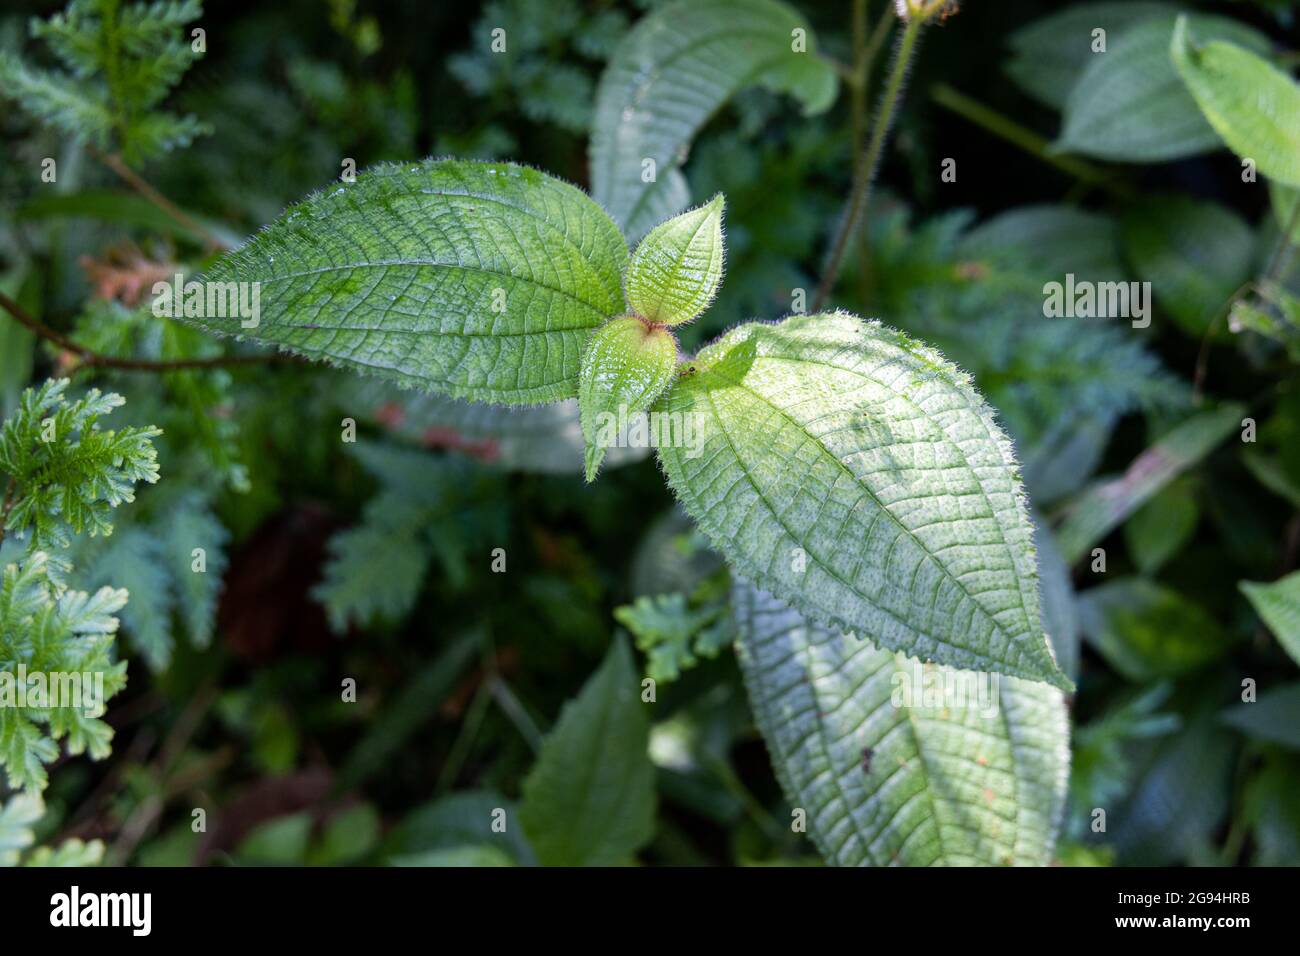 Clidemia hirta or senduduk buluh is plant found in tropical rainforest and have medicinal value Stock Photo